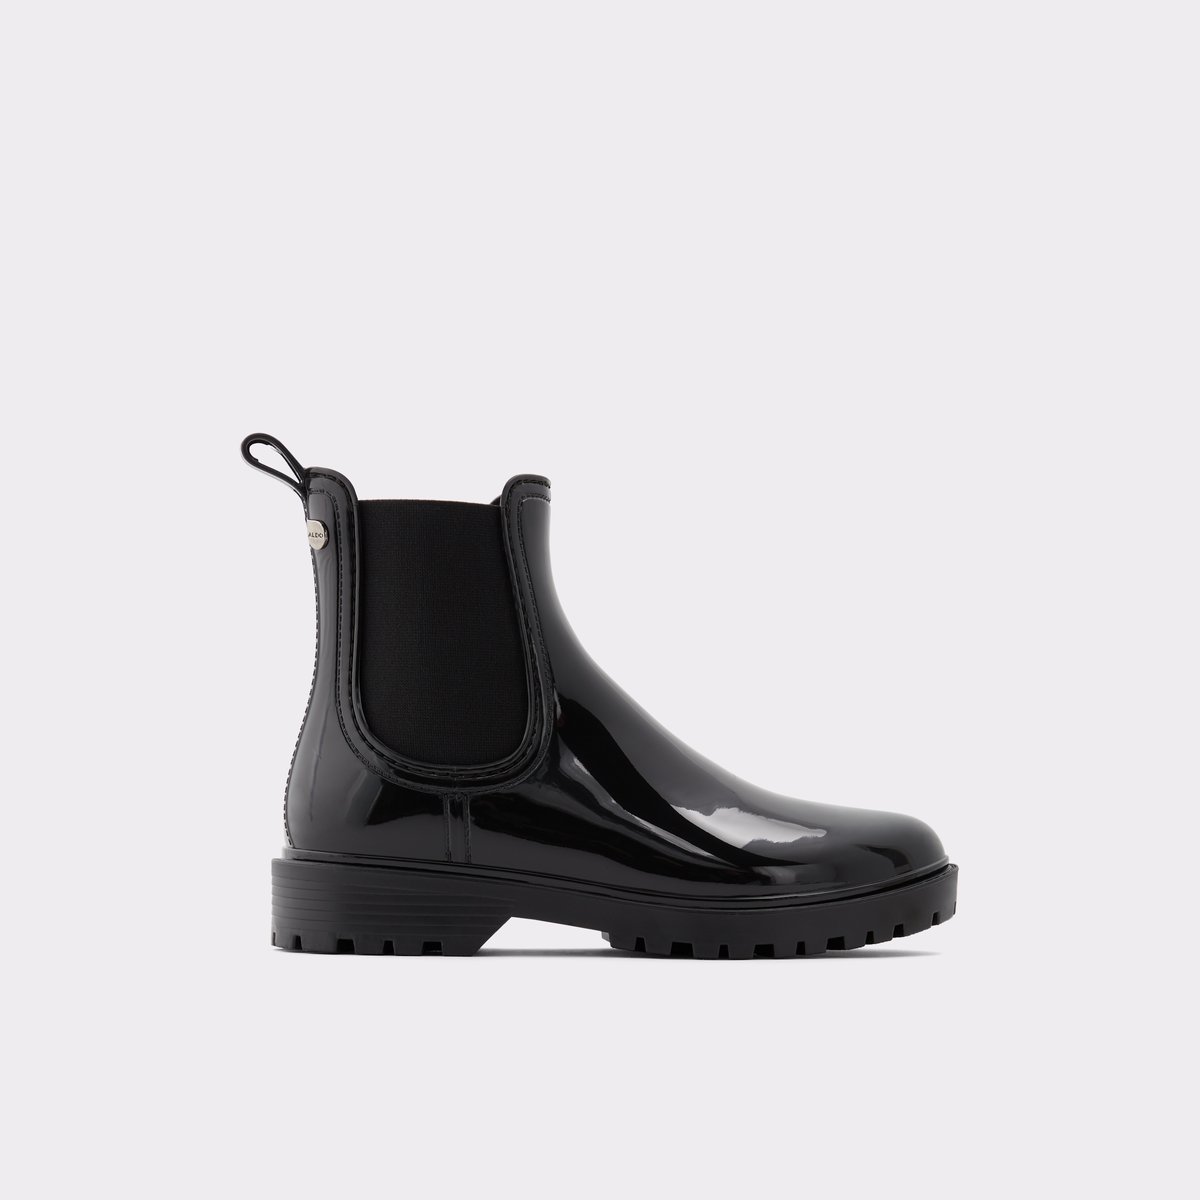 Ibaodda Black Women's Ankle Boots 